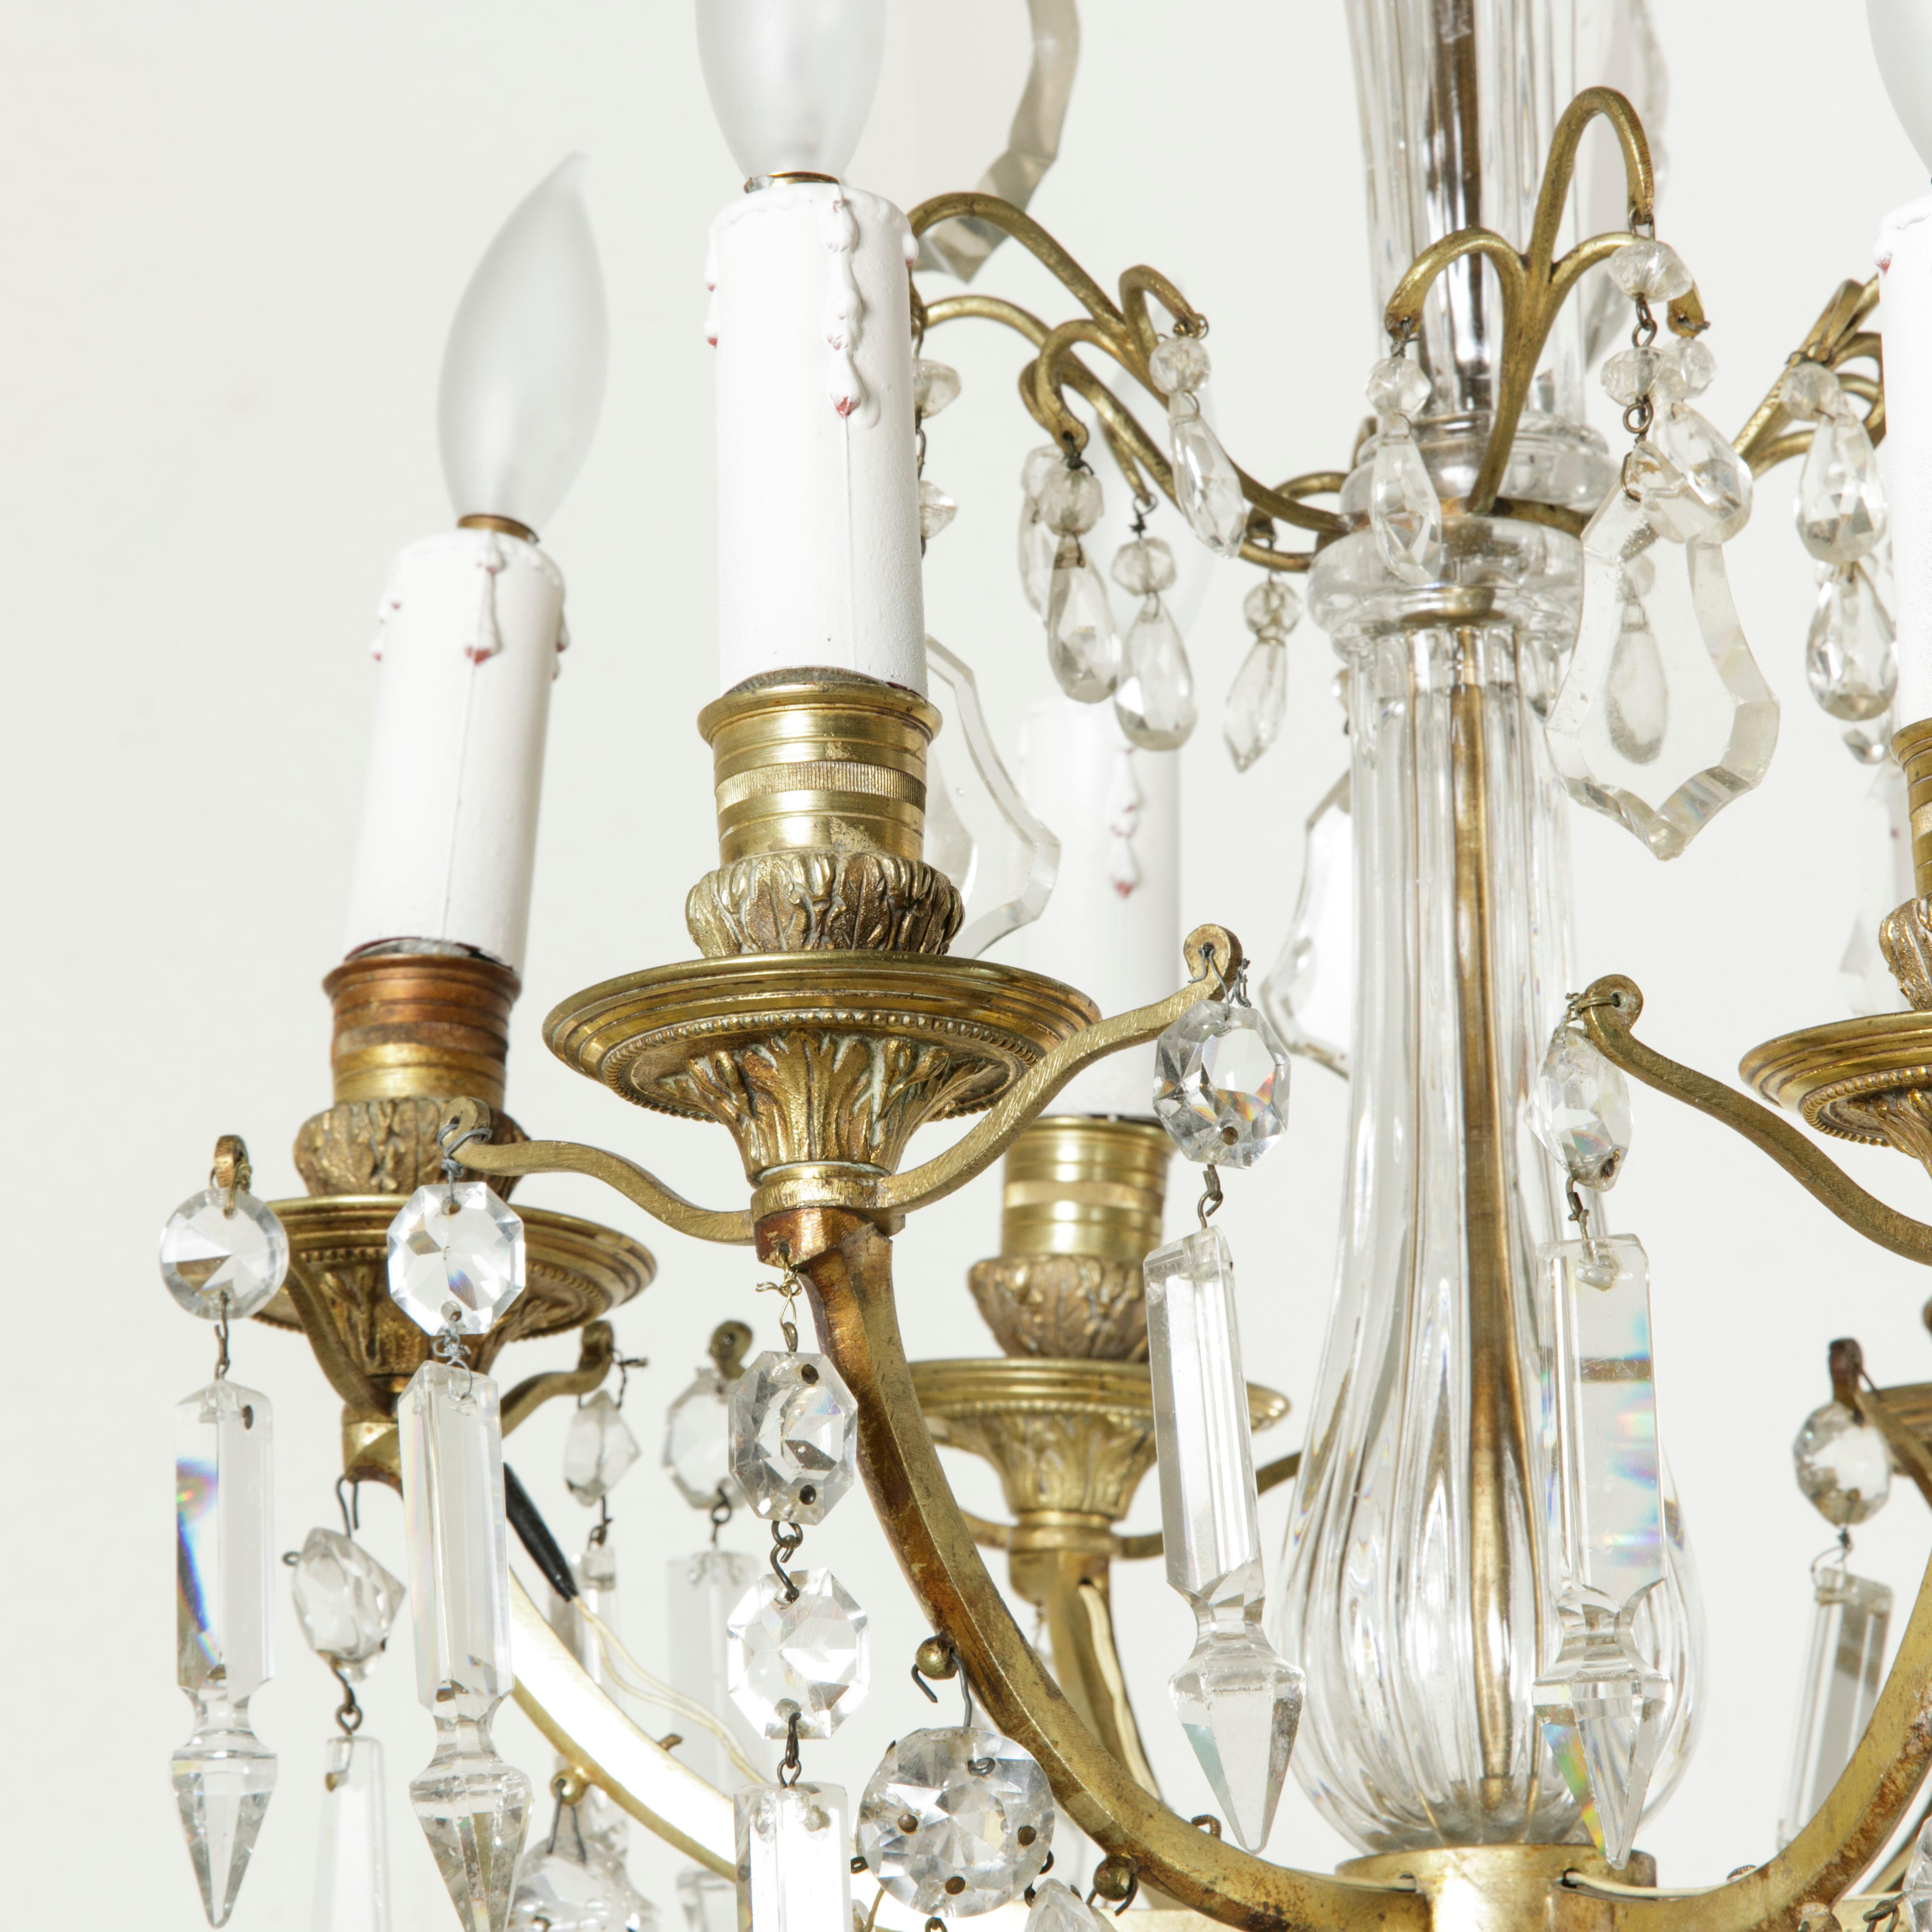 This elegant crystal chandelier is beautifully detailed. Its six arms are heavily draped with pendalogues and spears while its central crystal column leads to two more tiers with large pendalogues. The fantastic bronze canopy consists of six